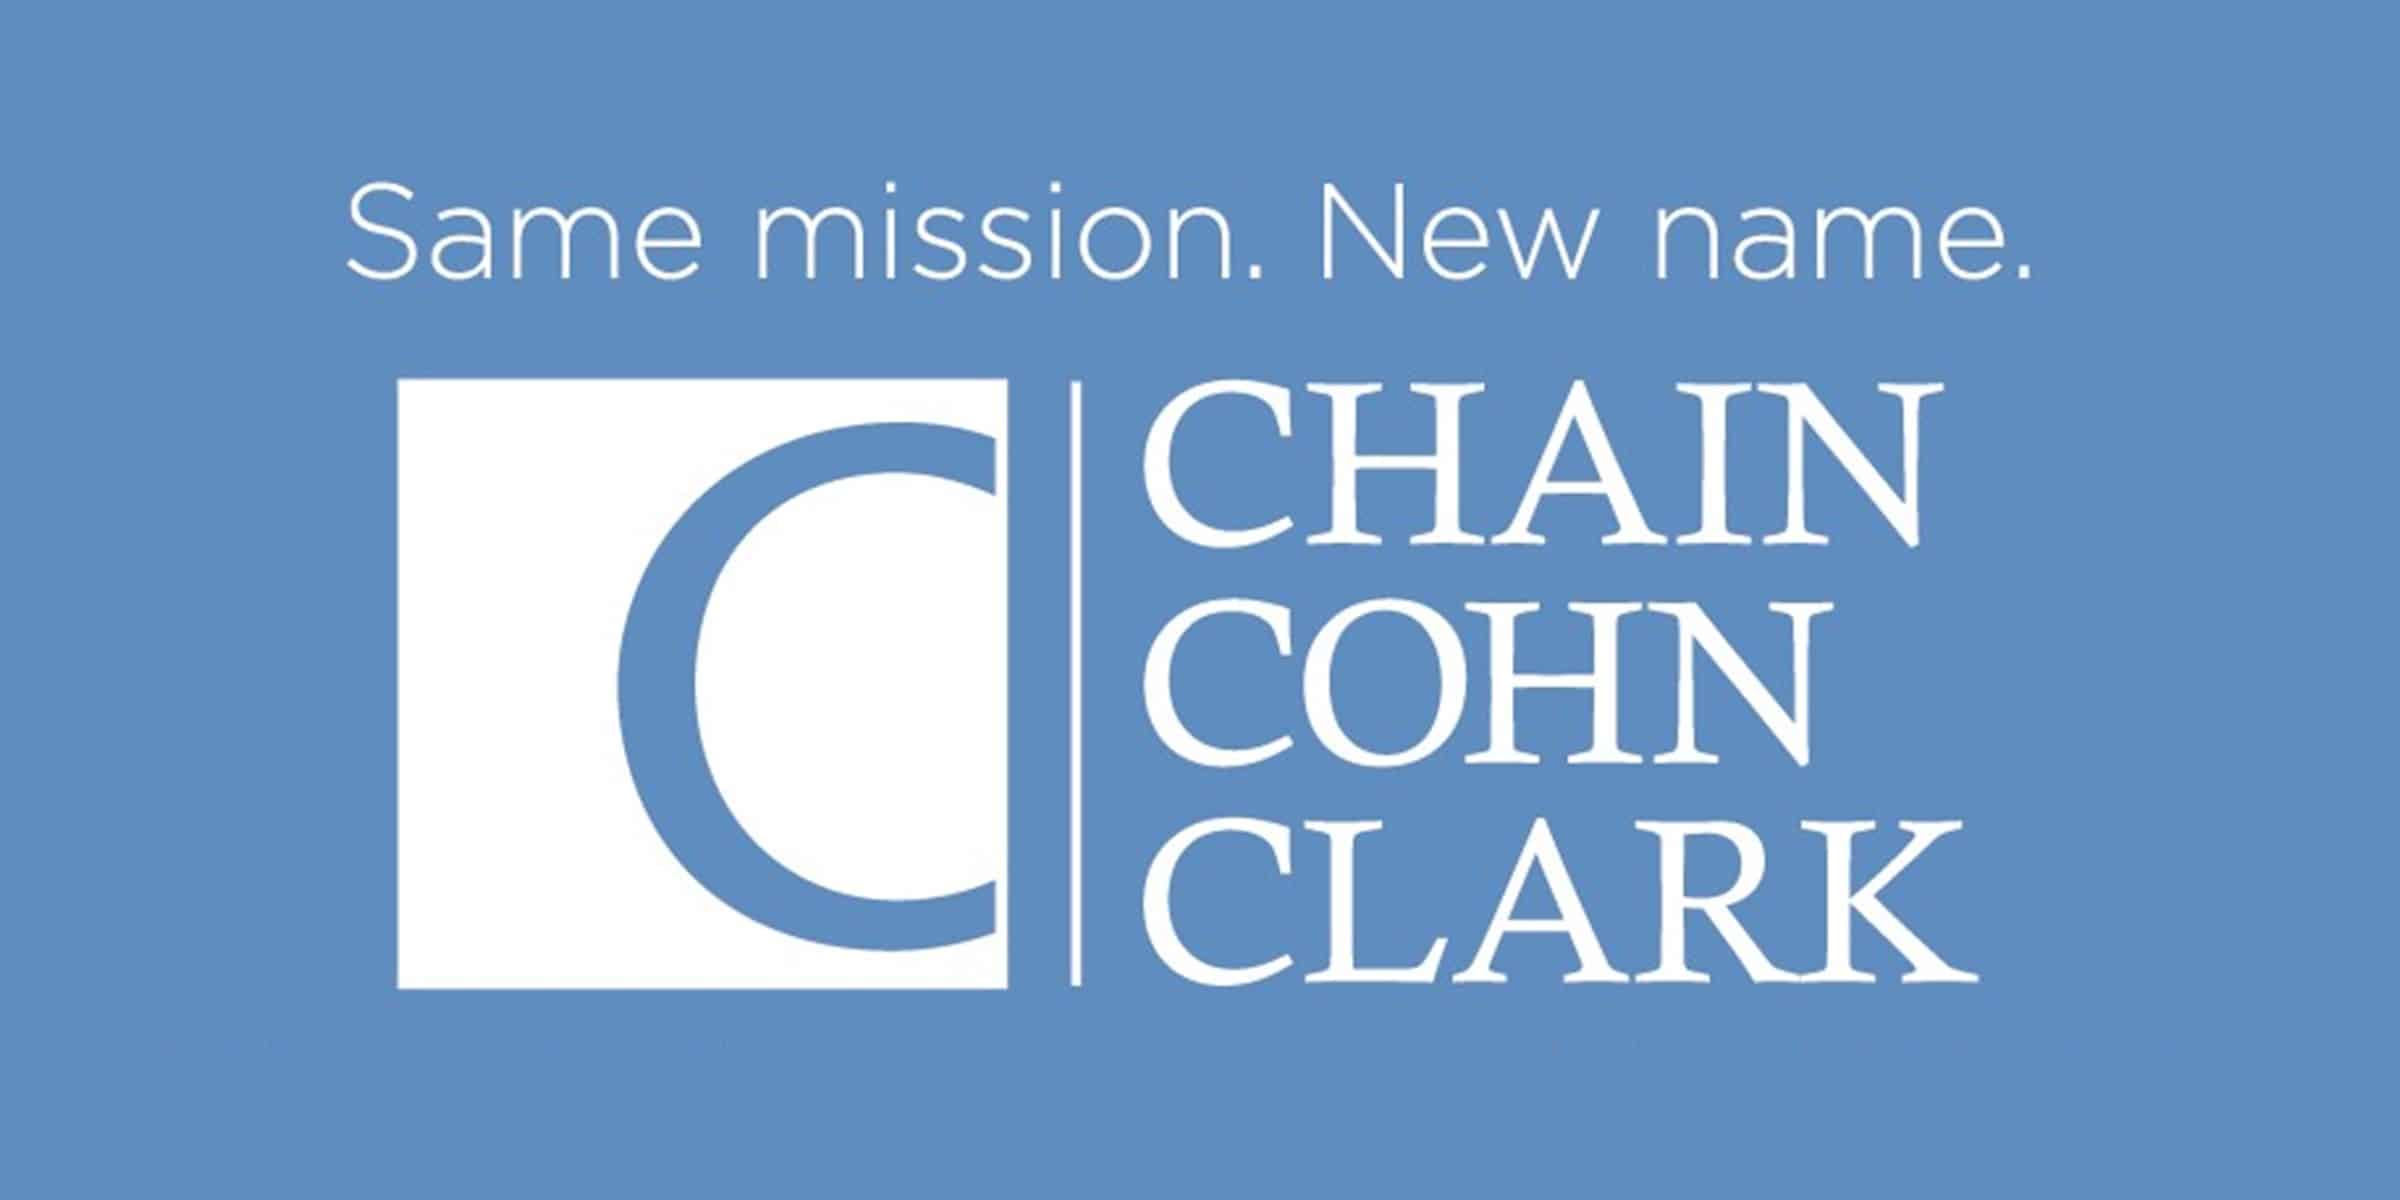 Kern County’s Oldest Accident And Injury Law Firm Changes Name To “Chain | Cohn | Clark”